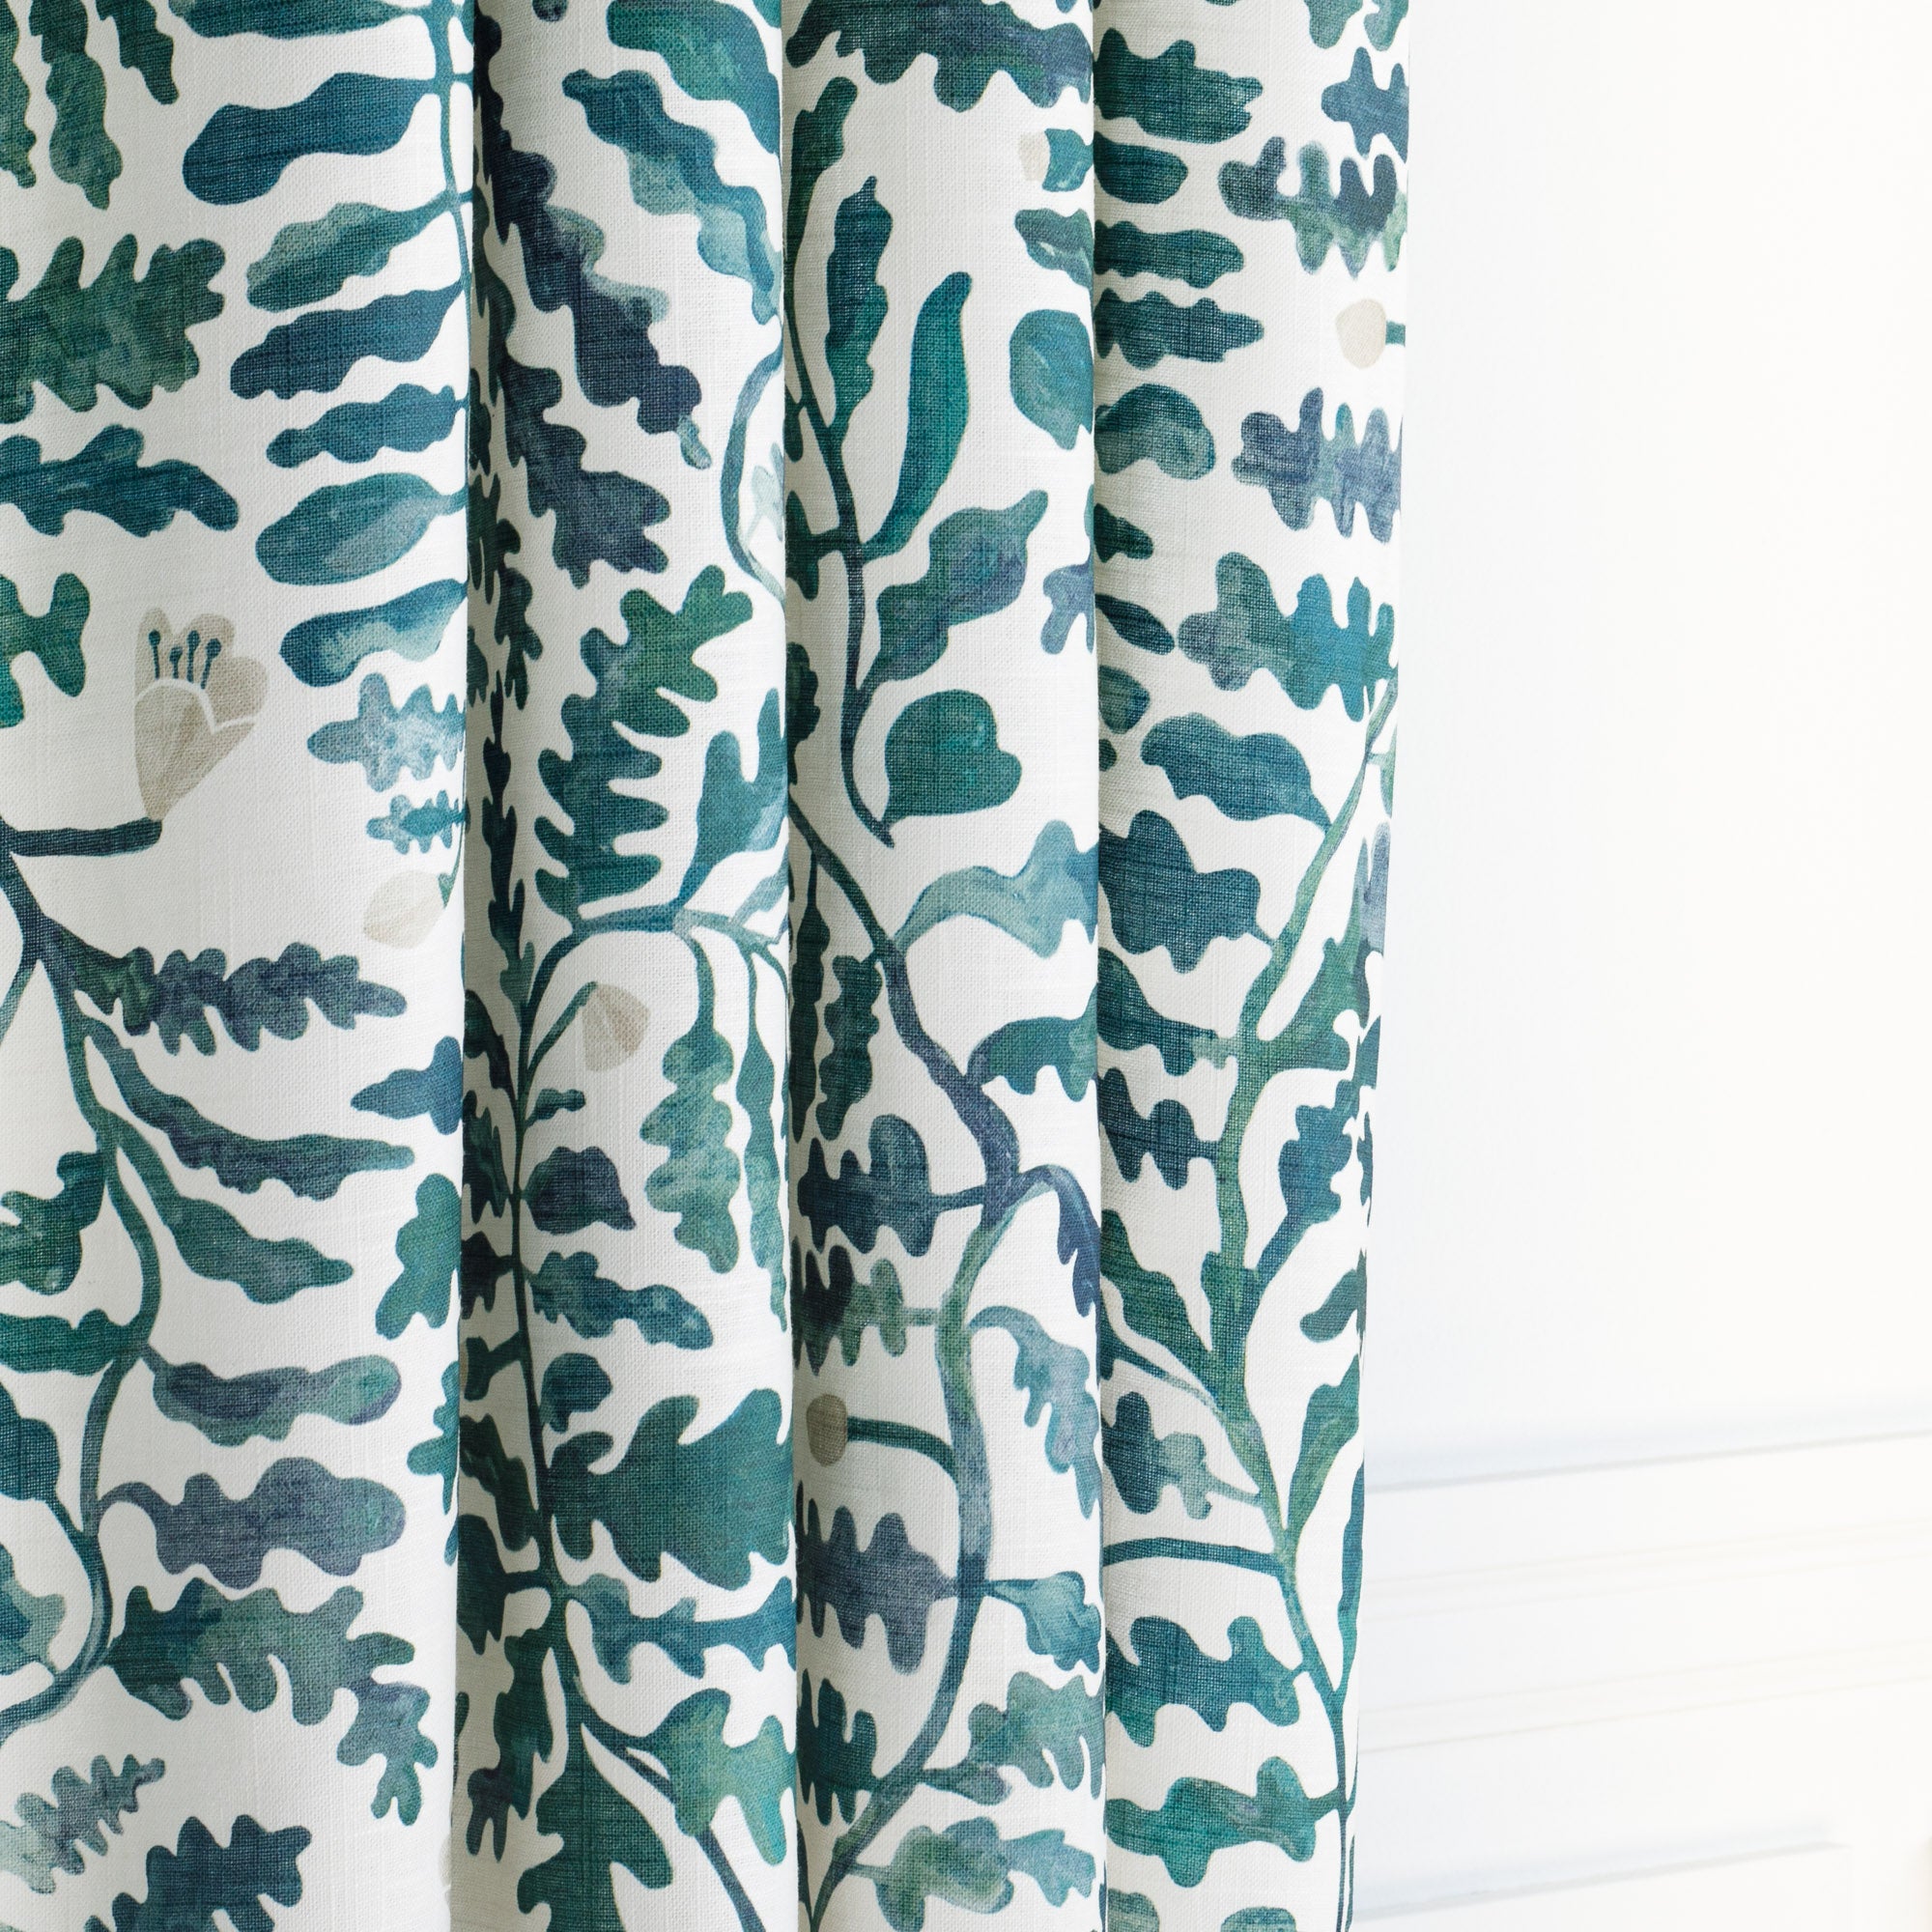 a teal and forest green and white leafy botanical linen blend fabric